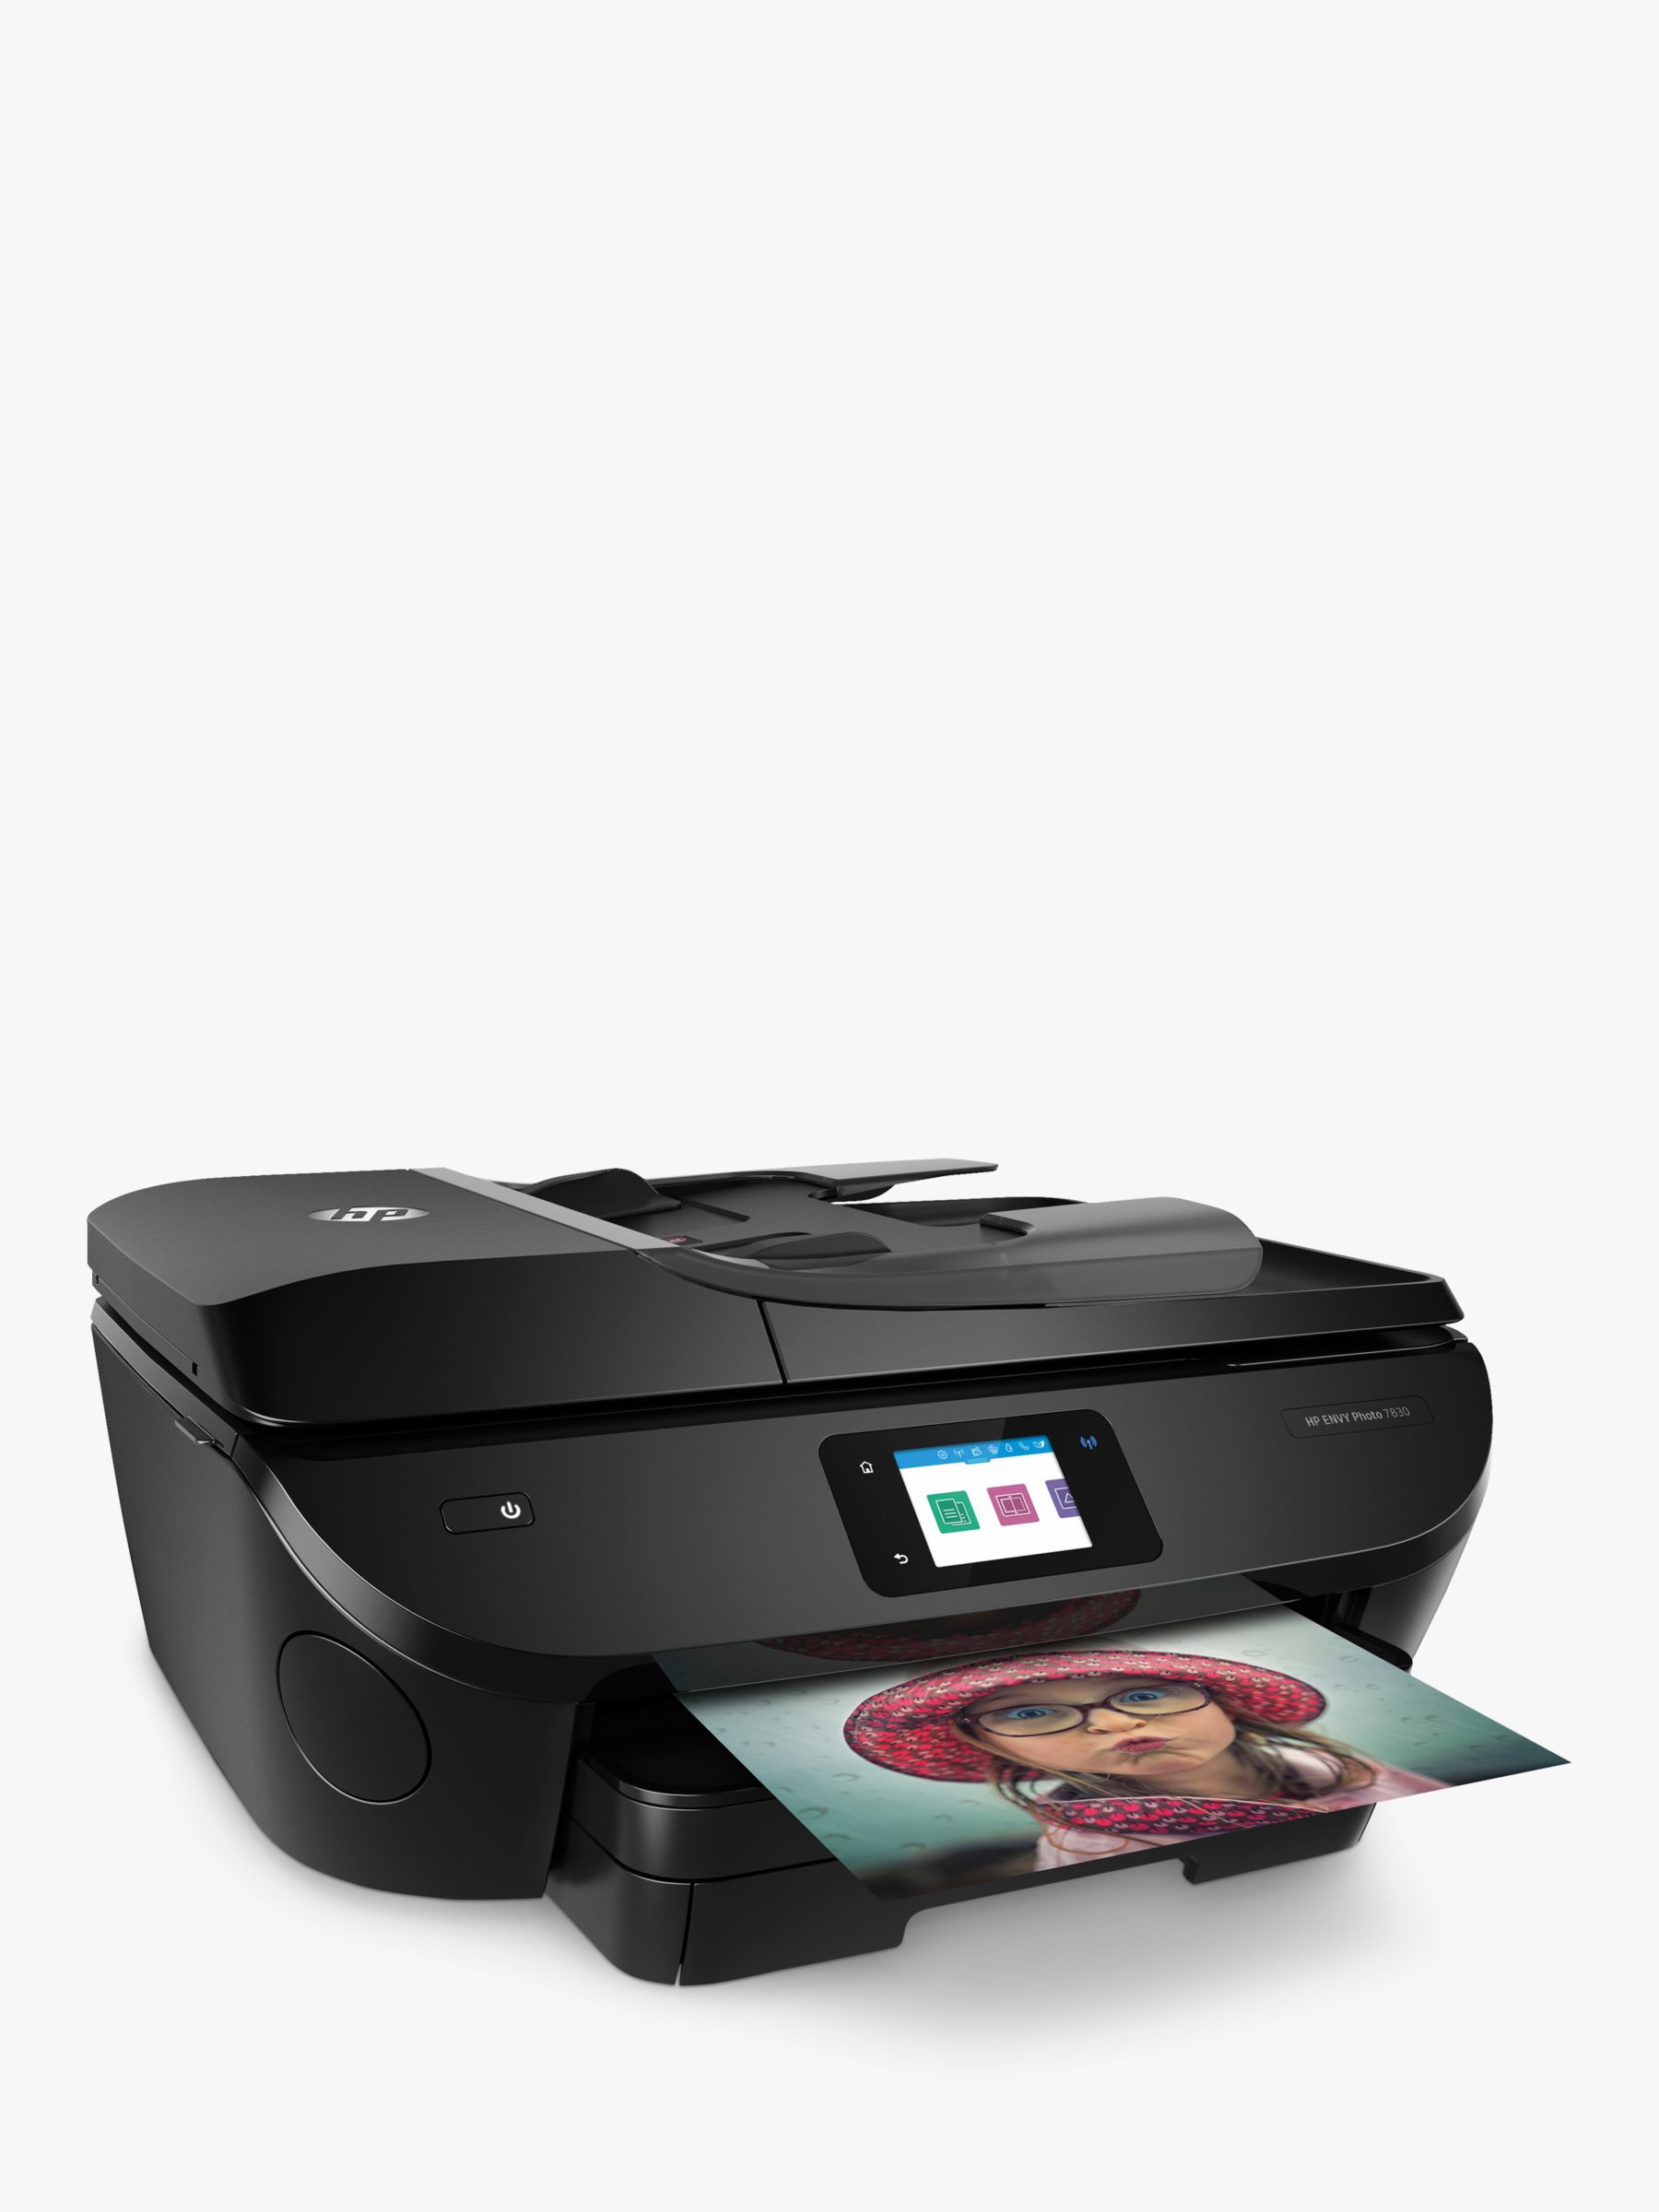 Hp Envy Photo 7830 All In One Wireless Printer Hp Instant Ink